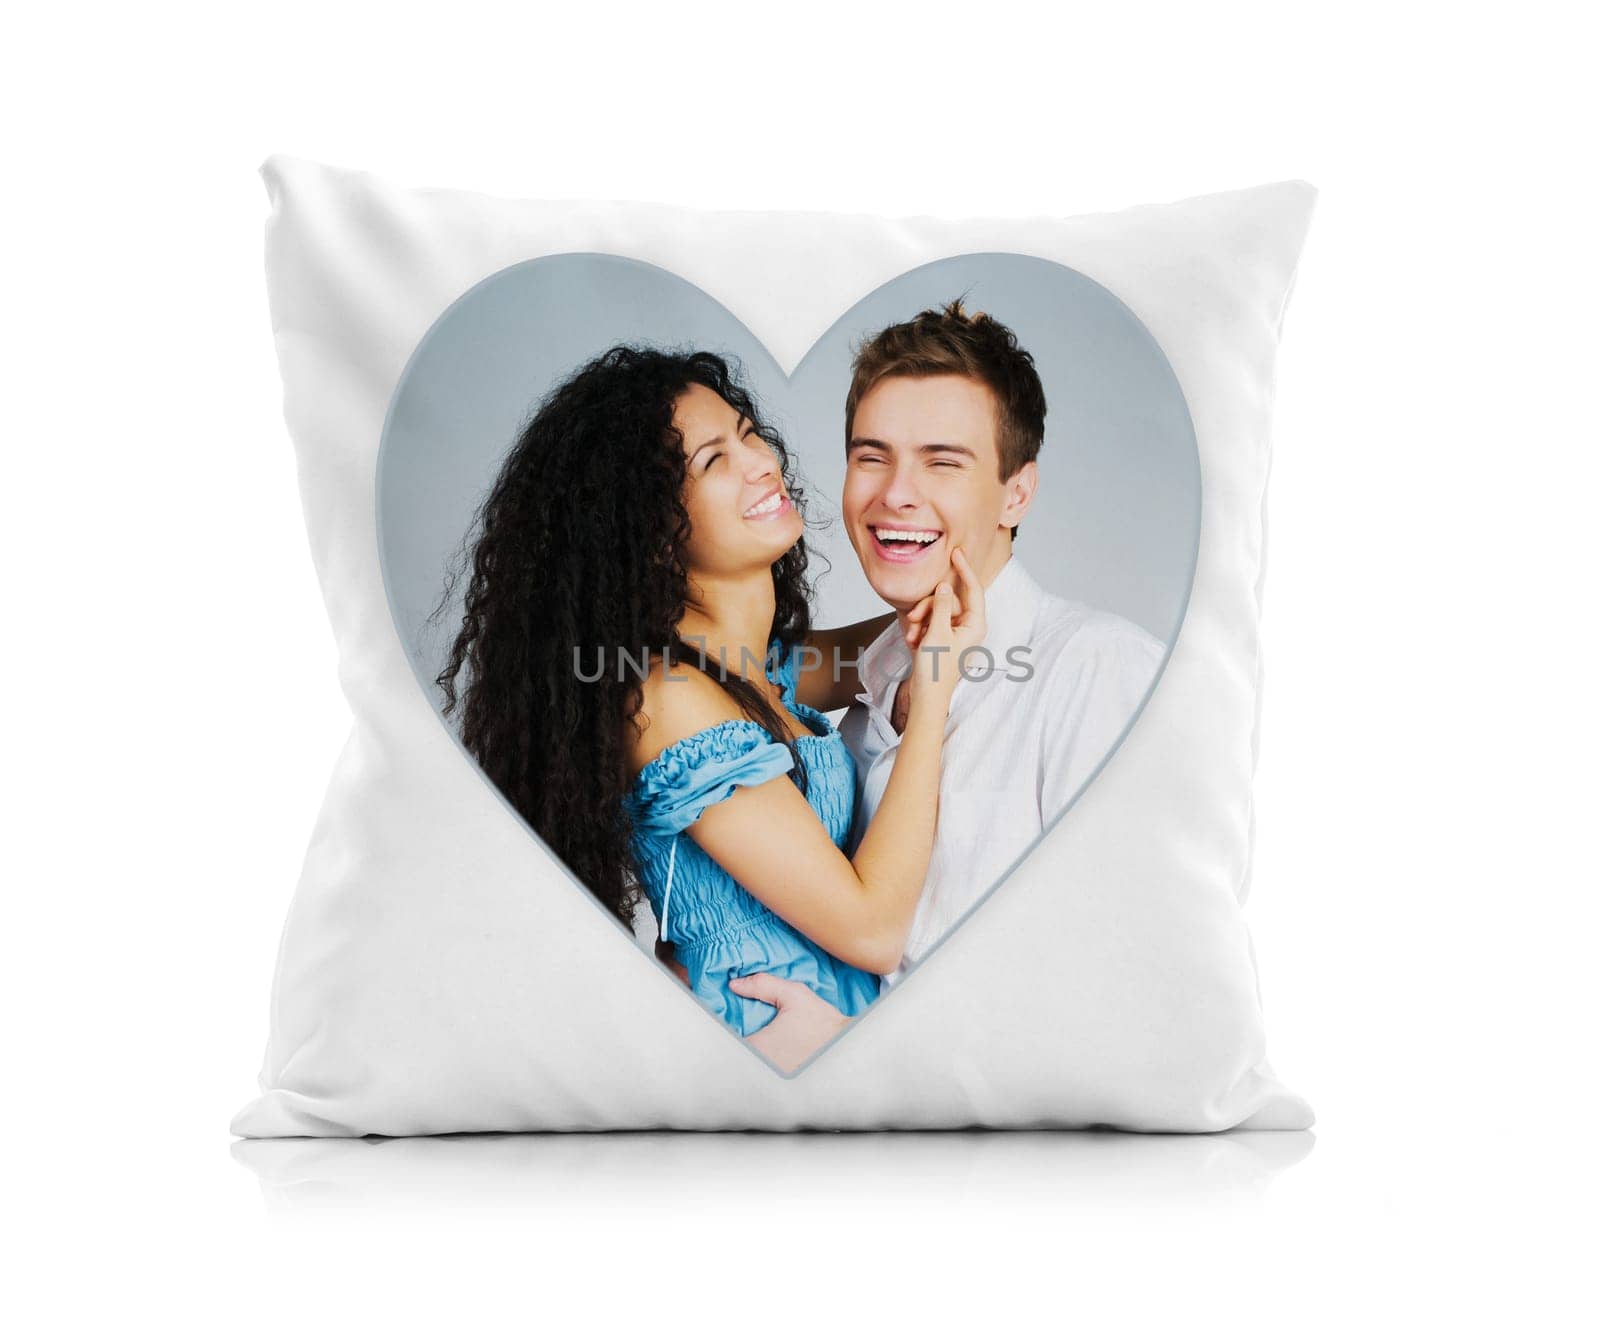 Pillow Isolated On White Background Features Printed Image Of Loving Couple